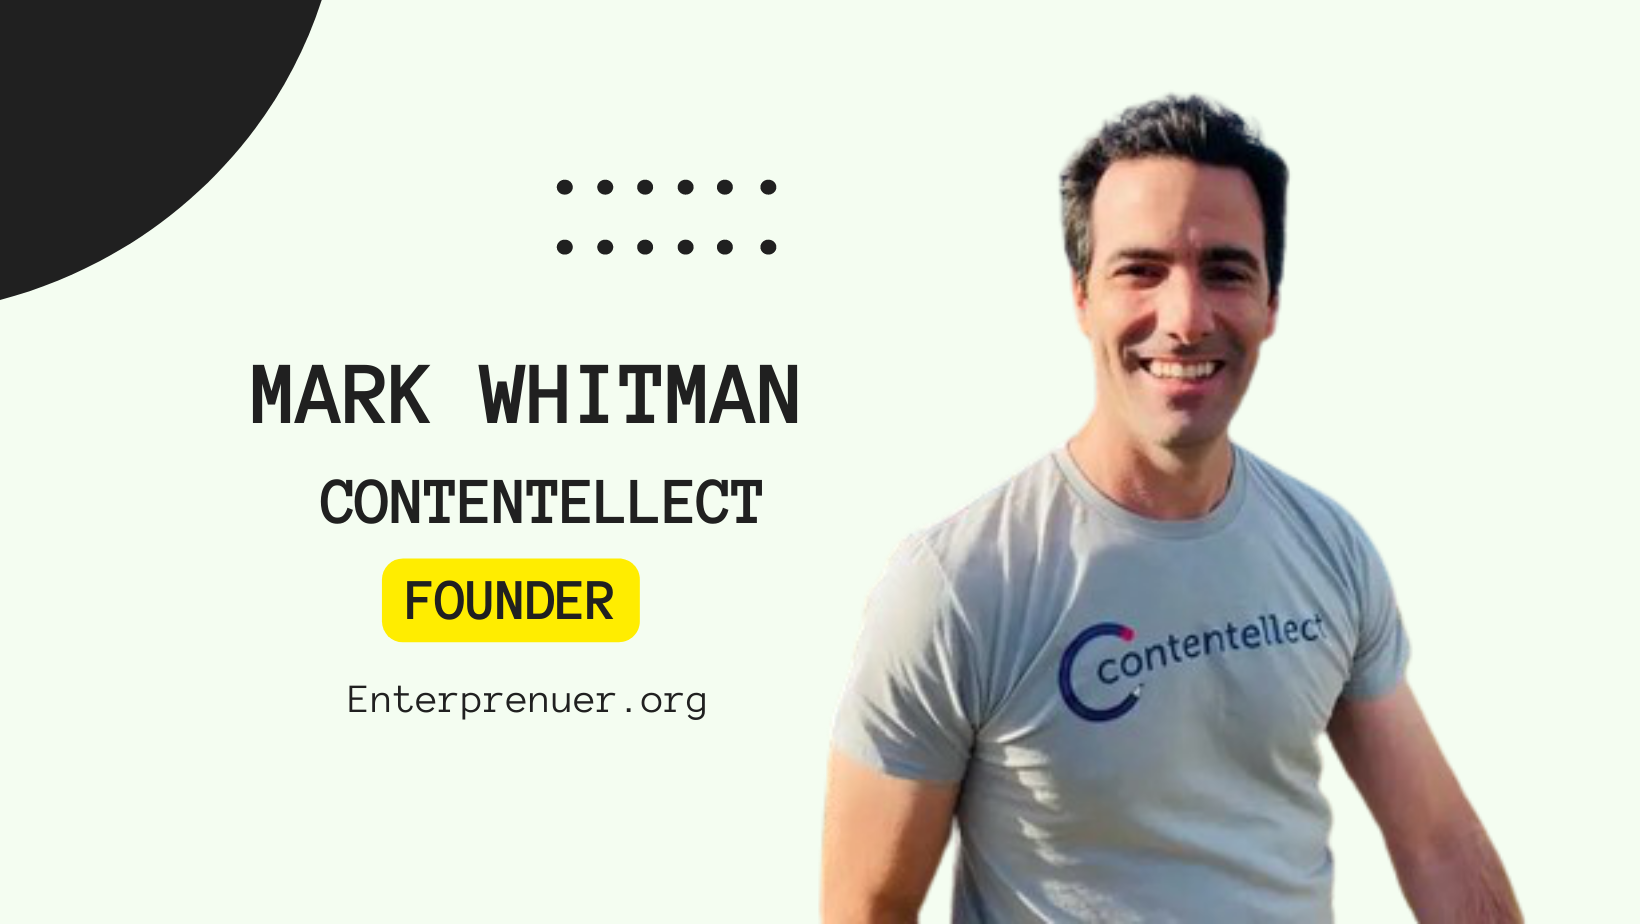 Mark Whitman Founder of Contentellect